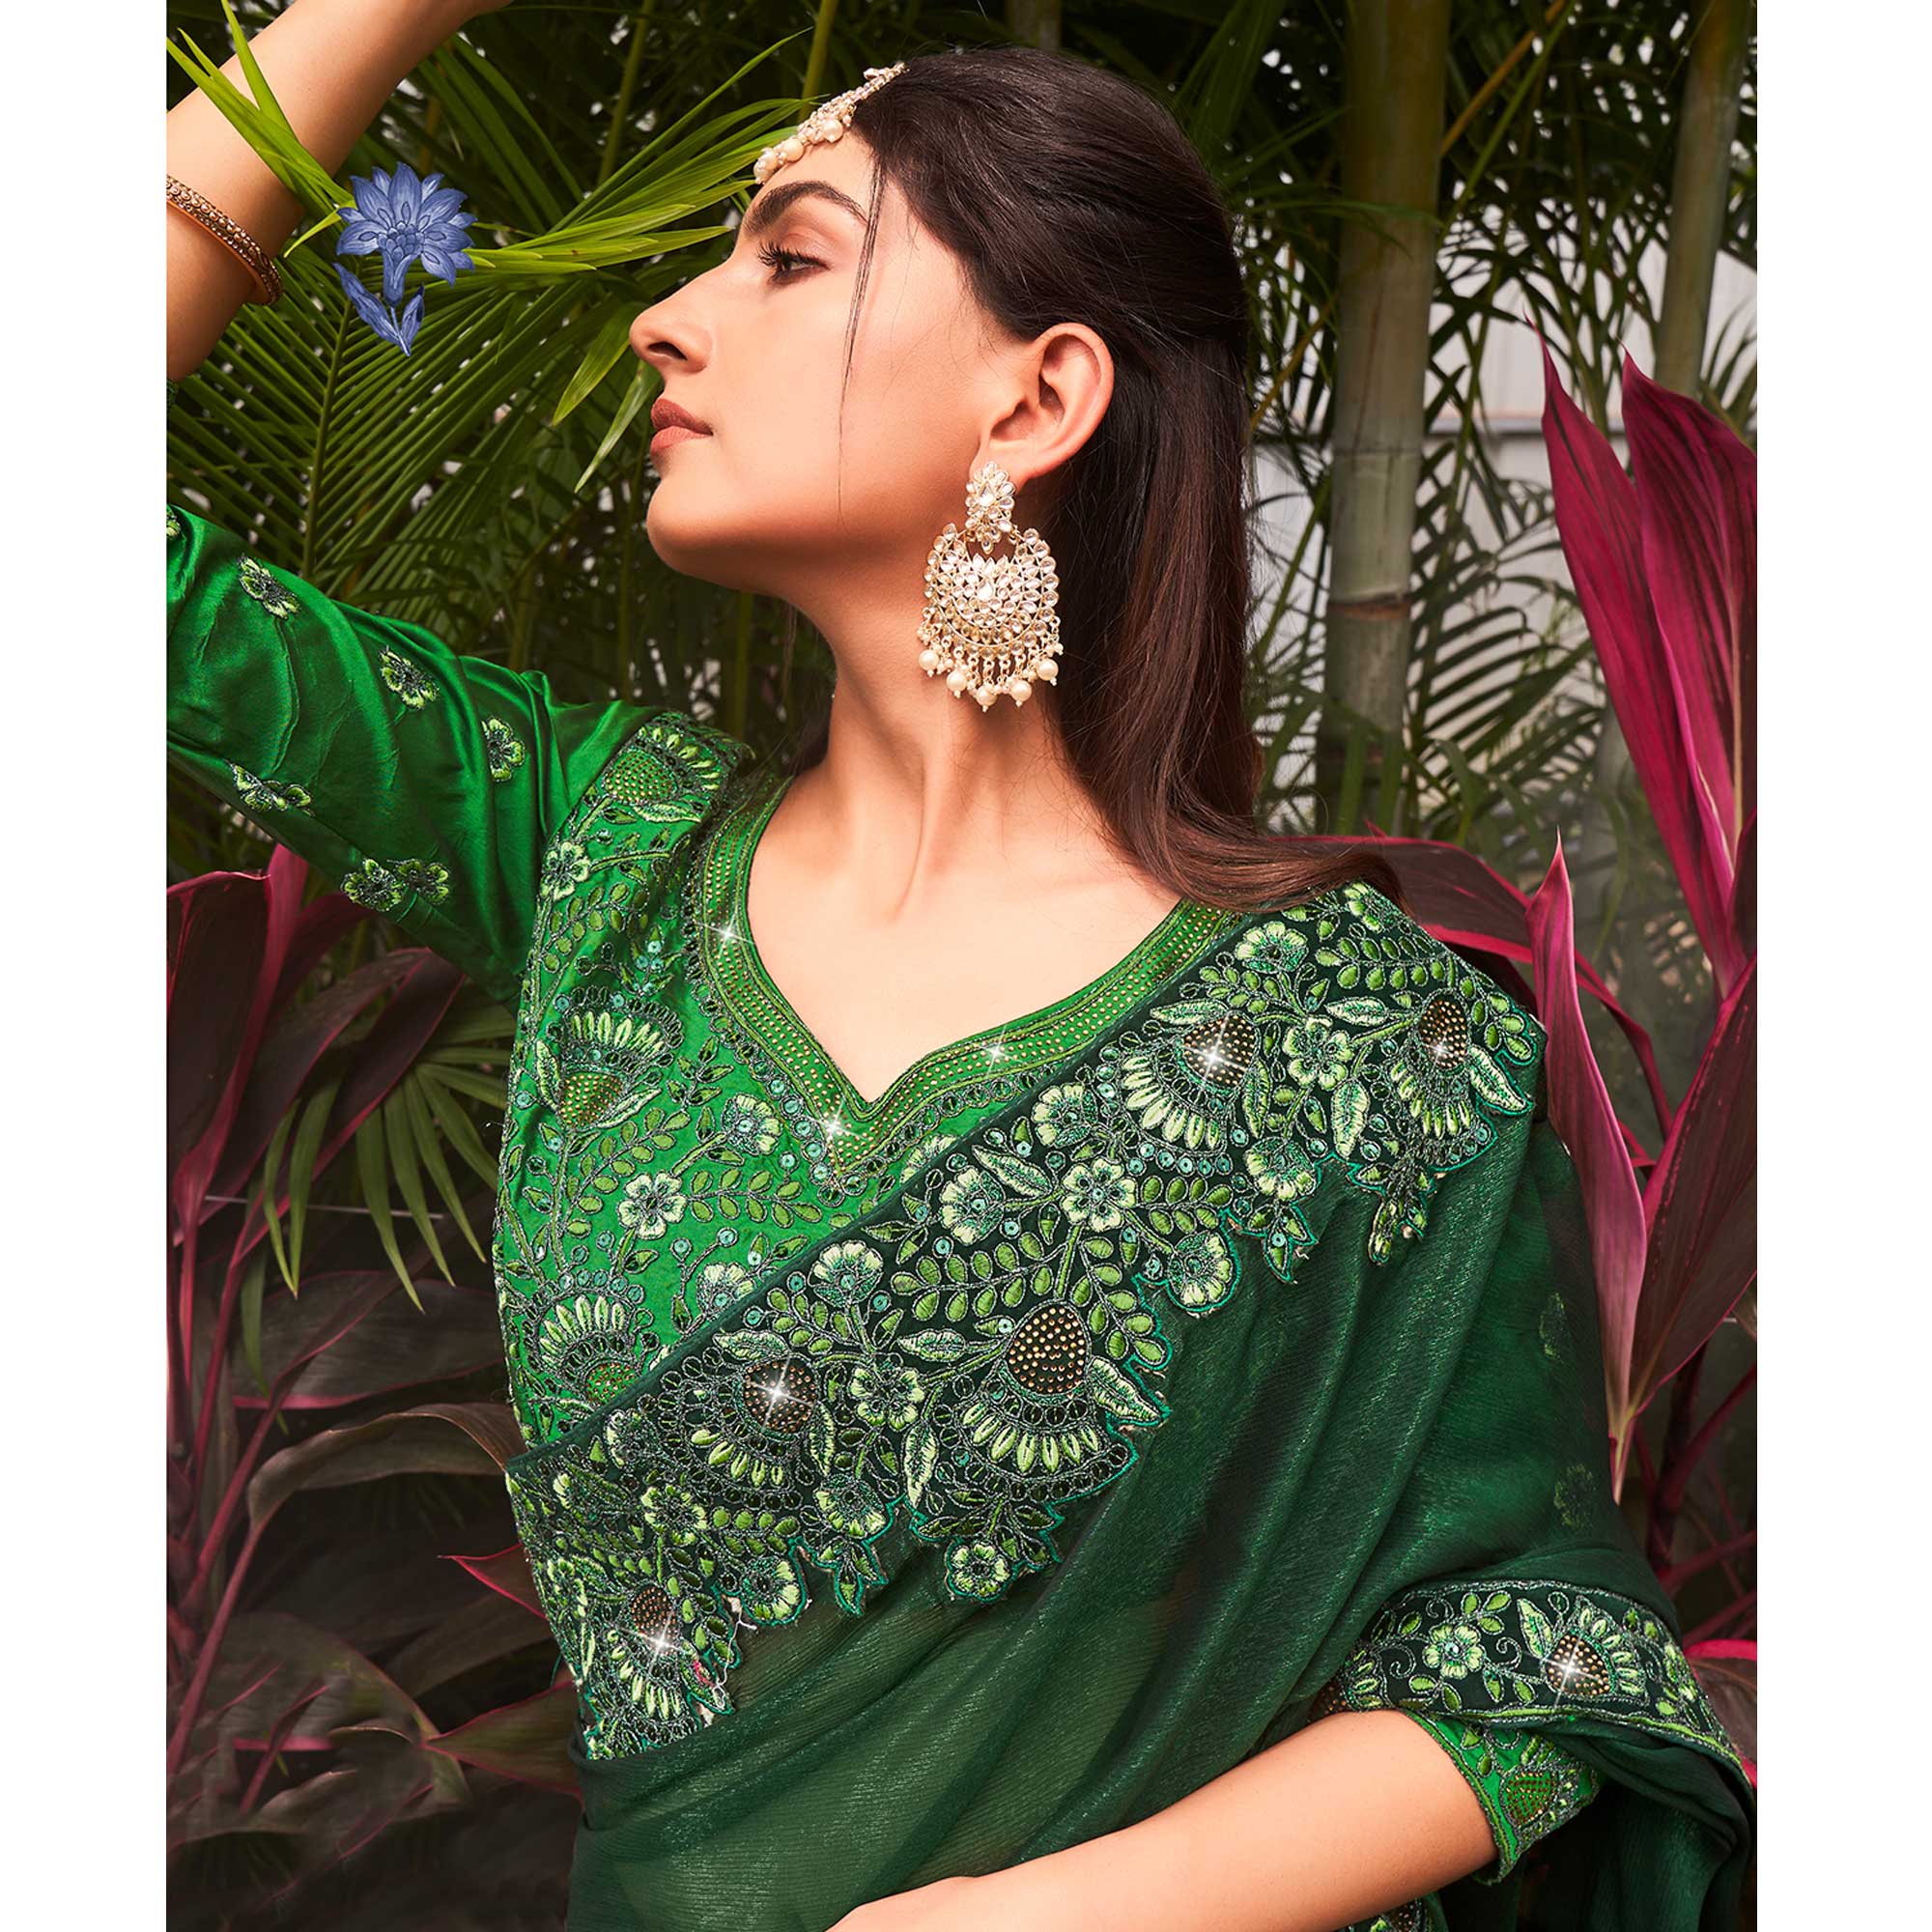 Green Solid With Embroidered Border Chiffon Saree